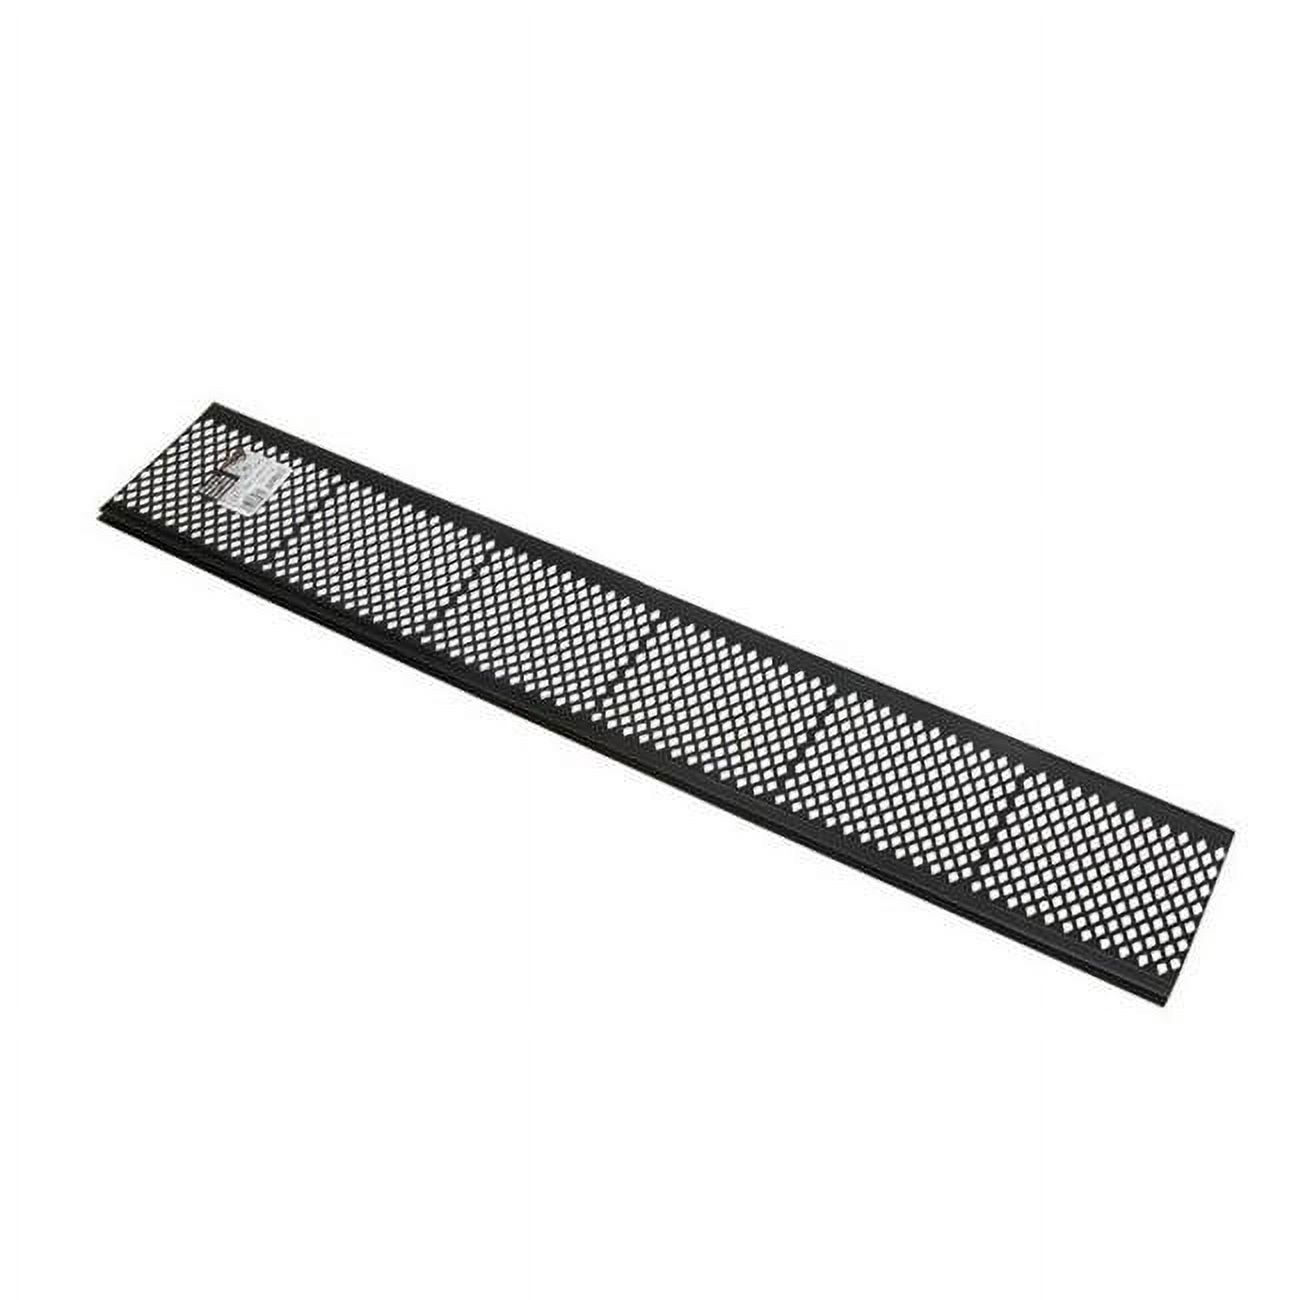 Amerimax 85475 6 in. Gutter Guard - pack of 50 - image 1 of 1